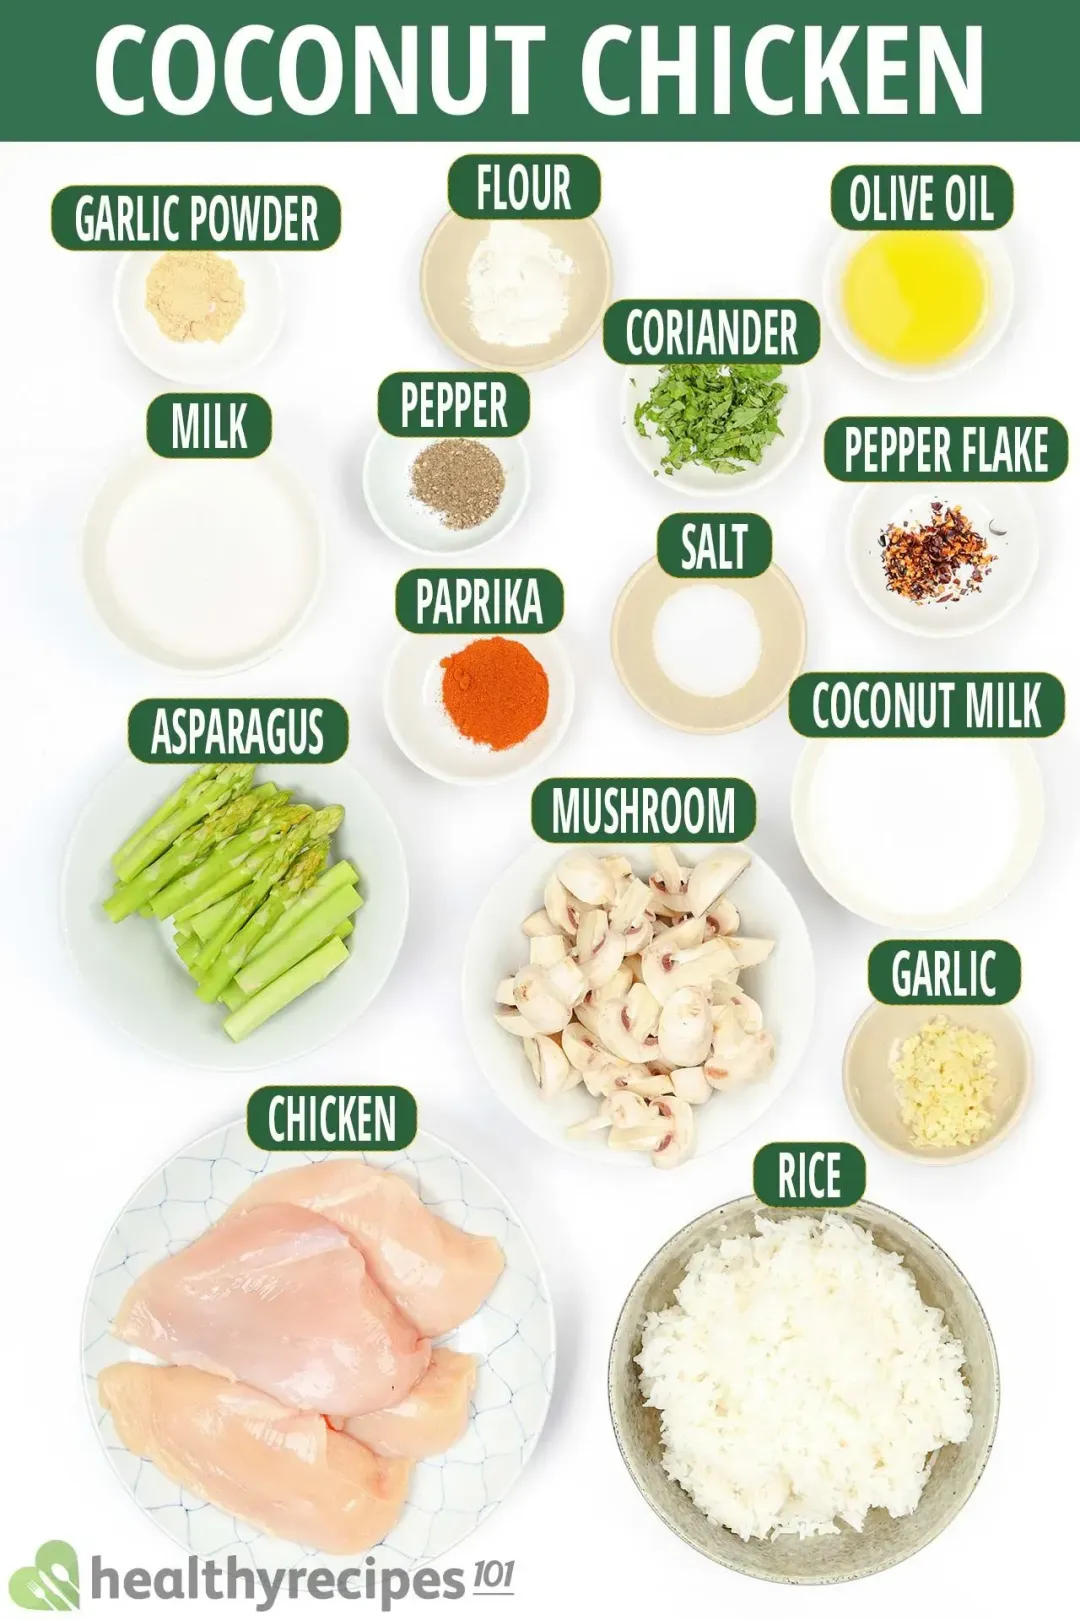 Ingredients for Coconut Chicken